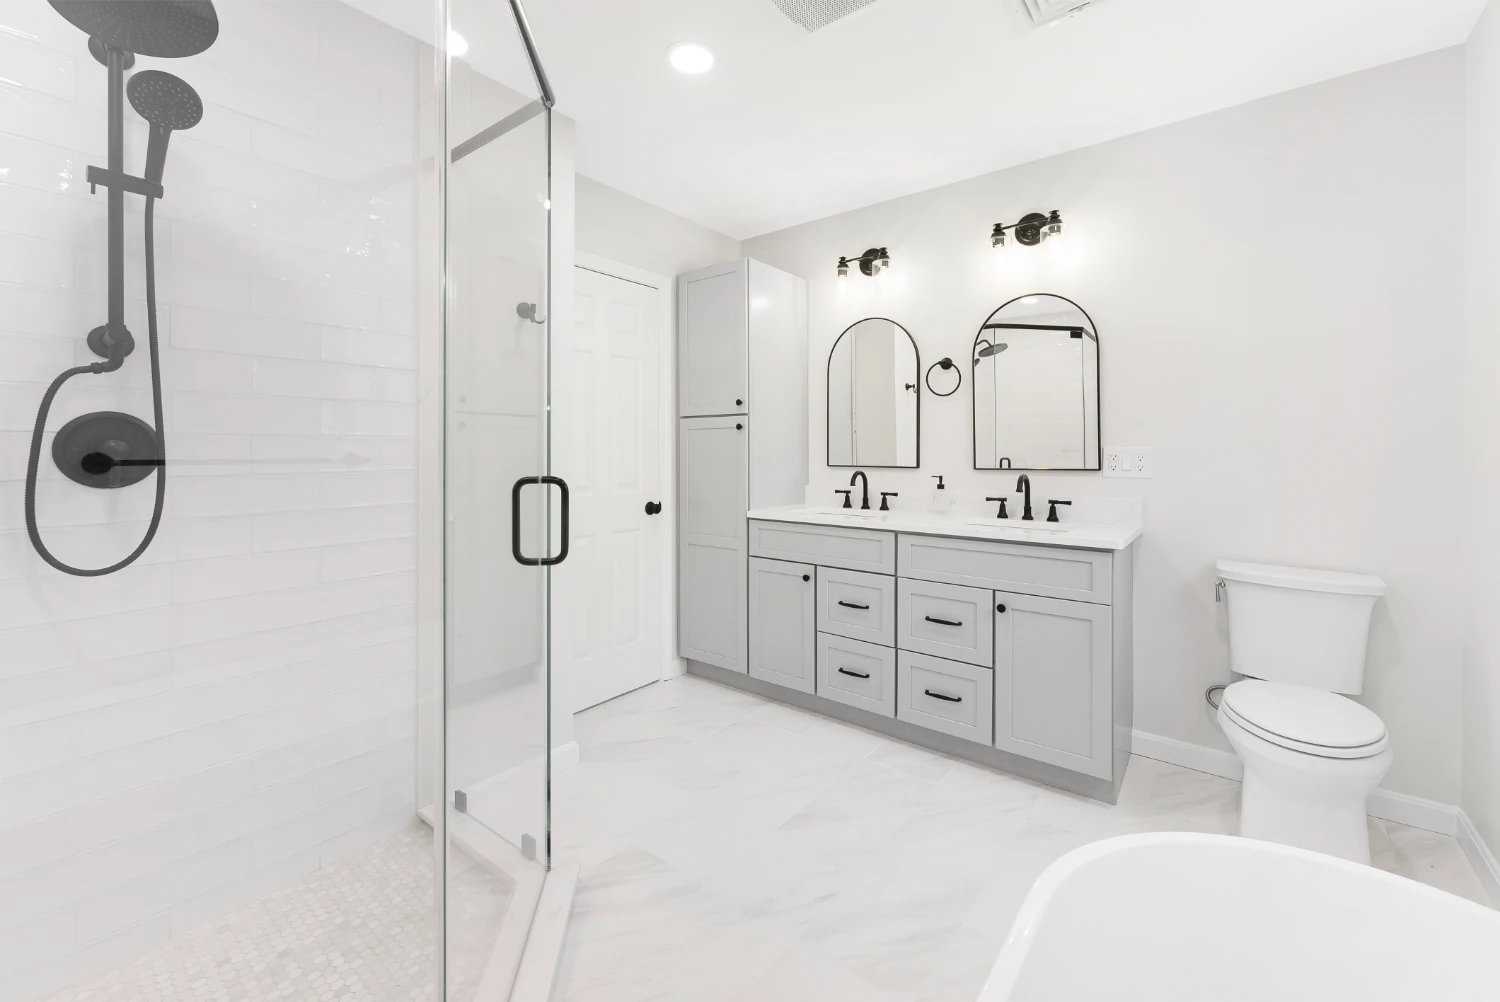 remodeled bathroom vanity with all white and gray